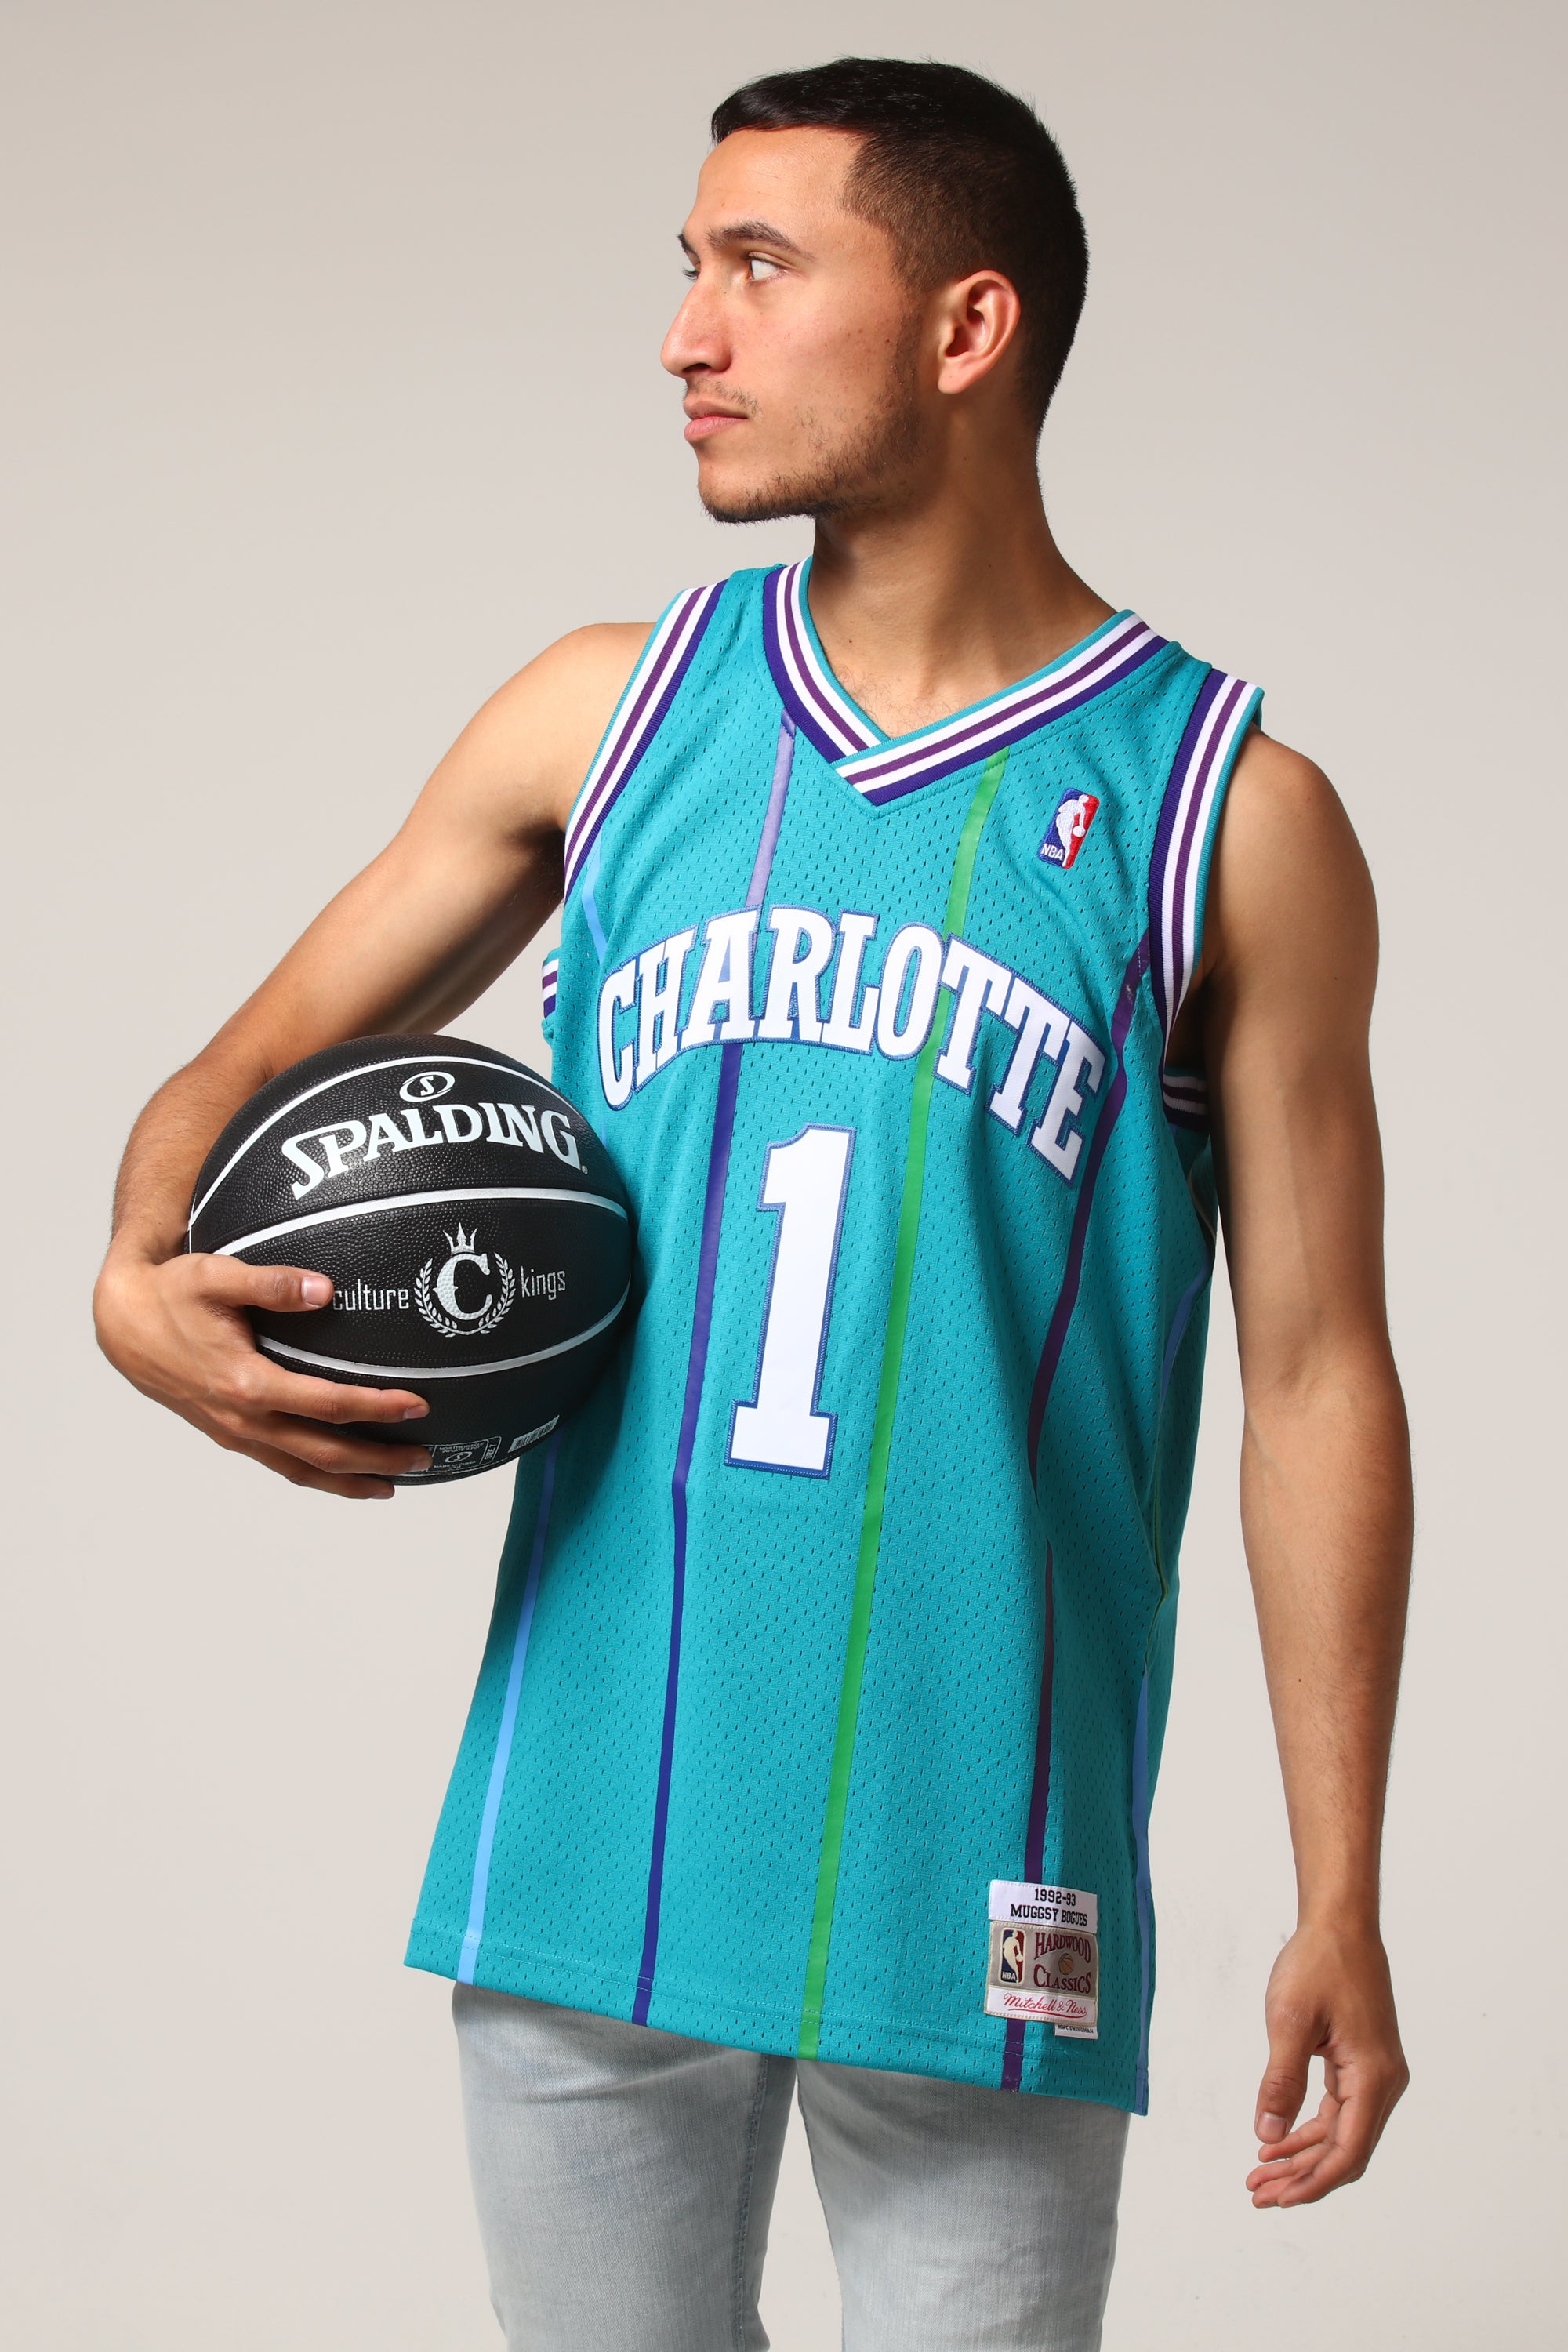 muggsy bogues youth jersey